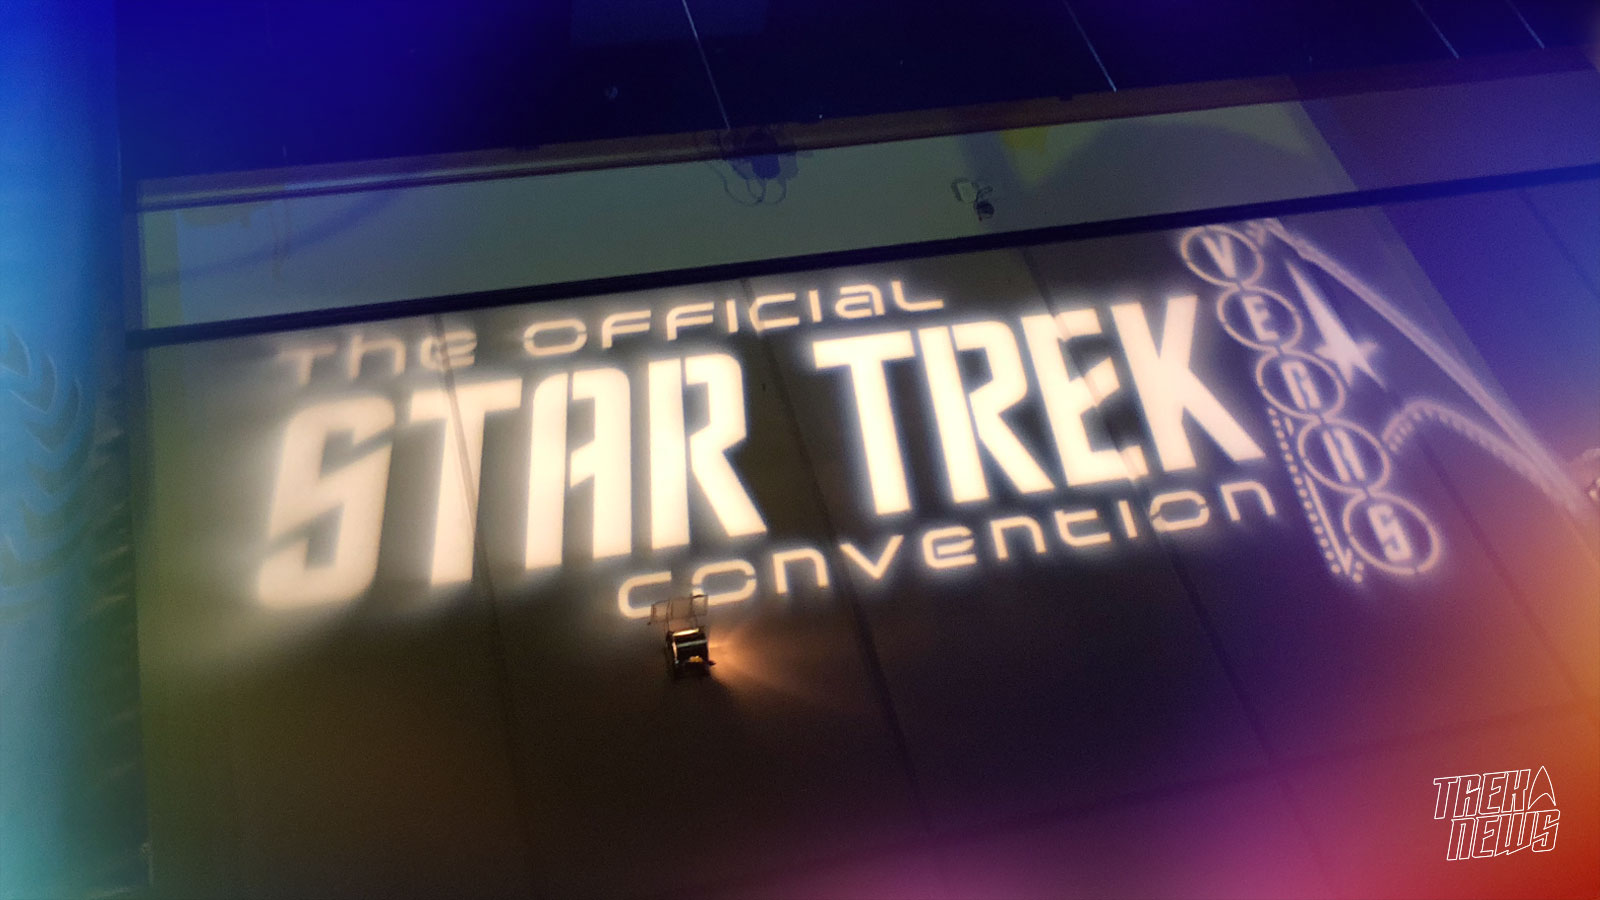 Star Trek Las Vegas Preview: ‘Discovery’ And ‘Deep Space Nine’ To Take Center Stage